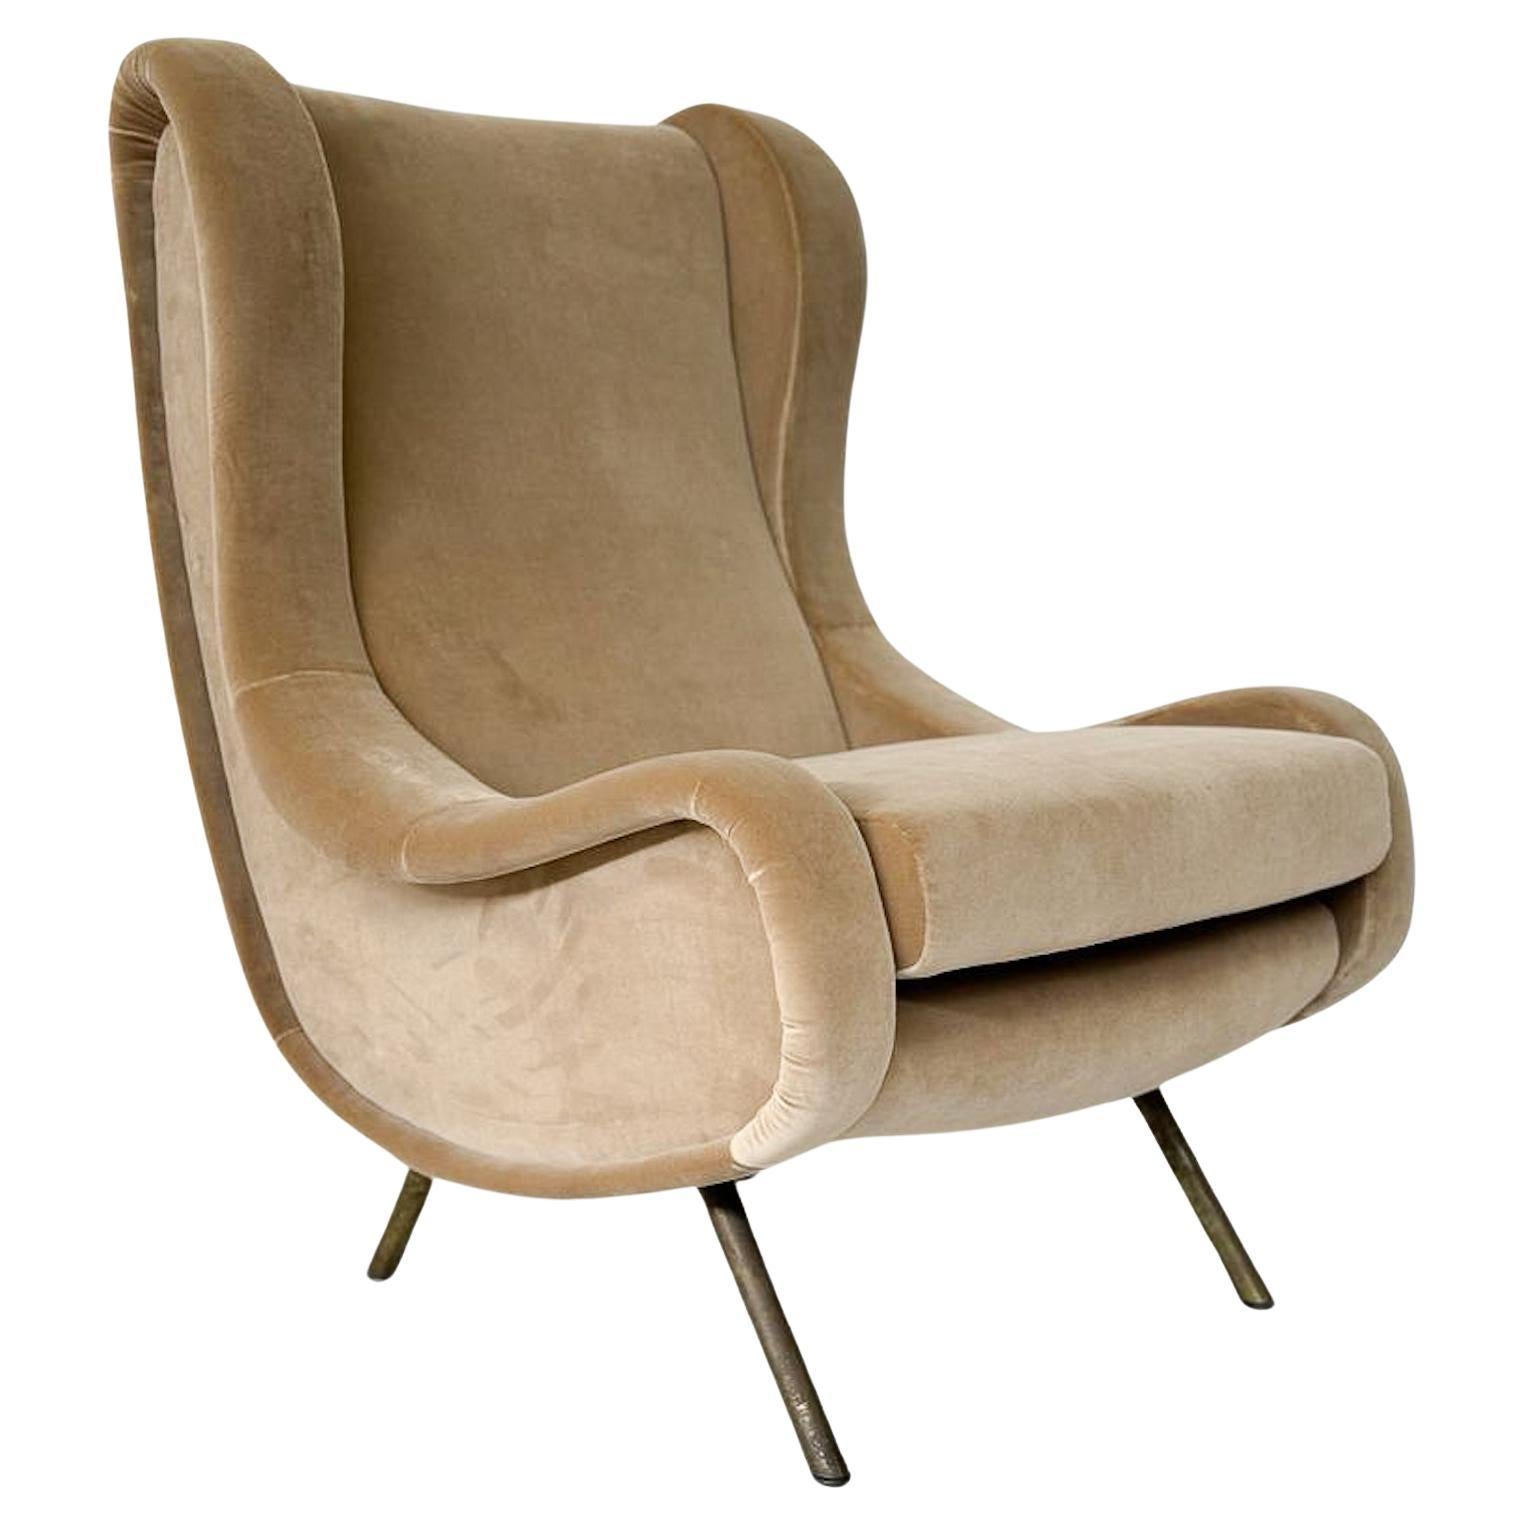 Mid-Century Modern Armchair by Marco Zanuso, Italy, 1960s - New Upholstery